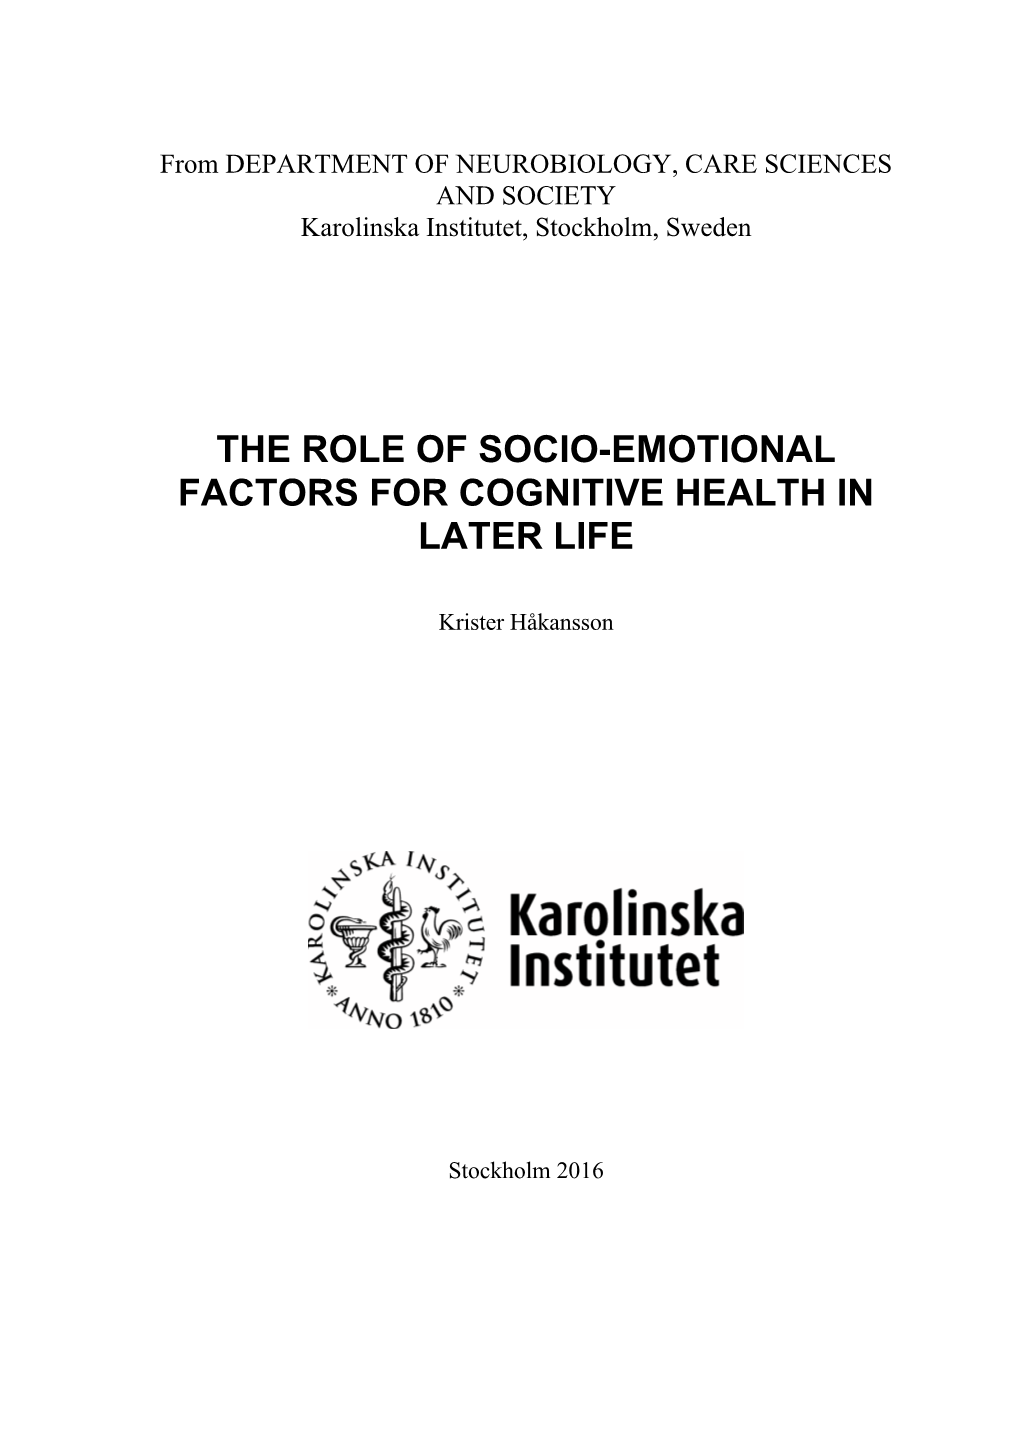 The Role of Socio-Emotional Factors for Cognitive Health in Later Life